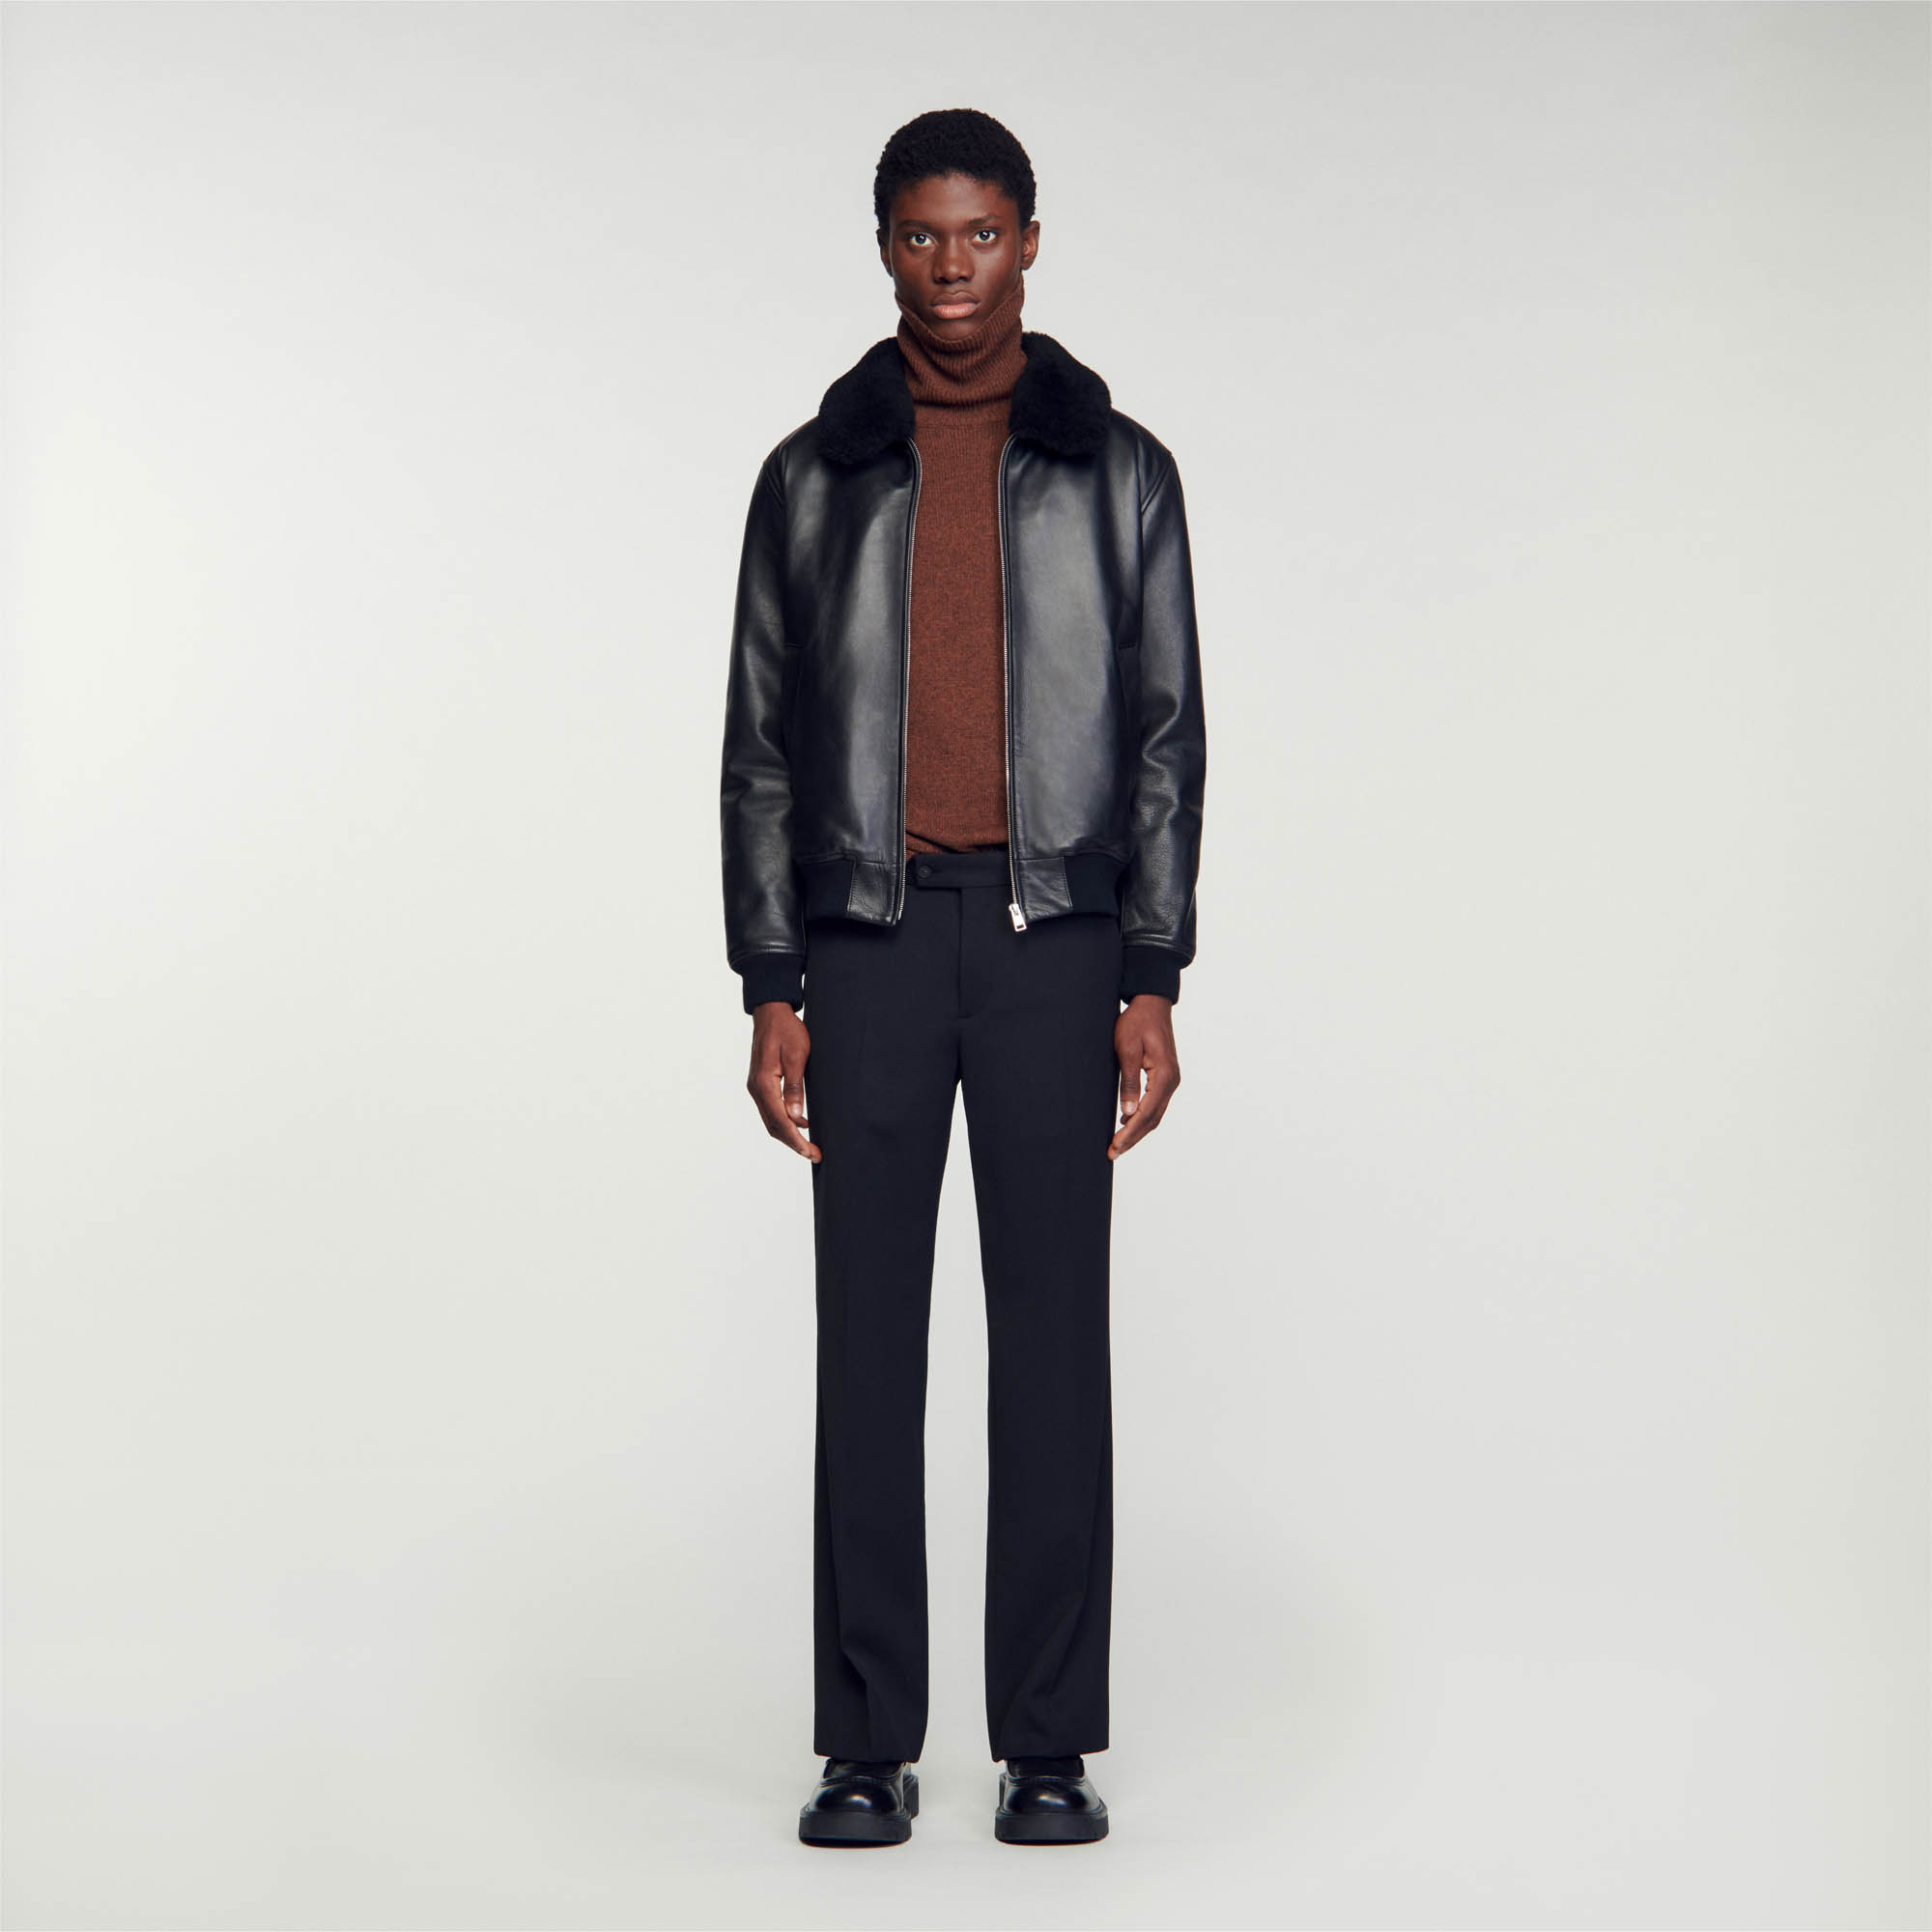 Sandro acetate Leather jacket with removable lapel collar, long sleeves, and zip fastening